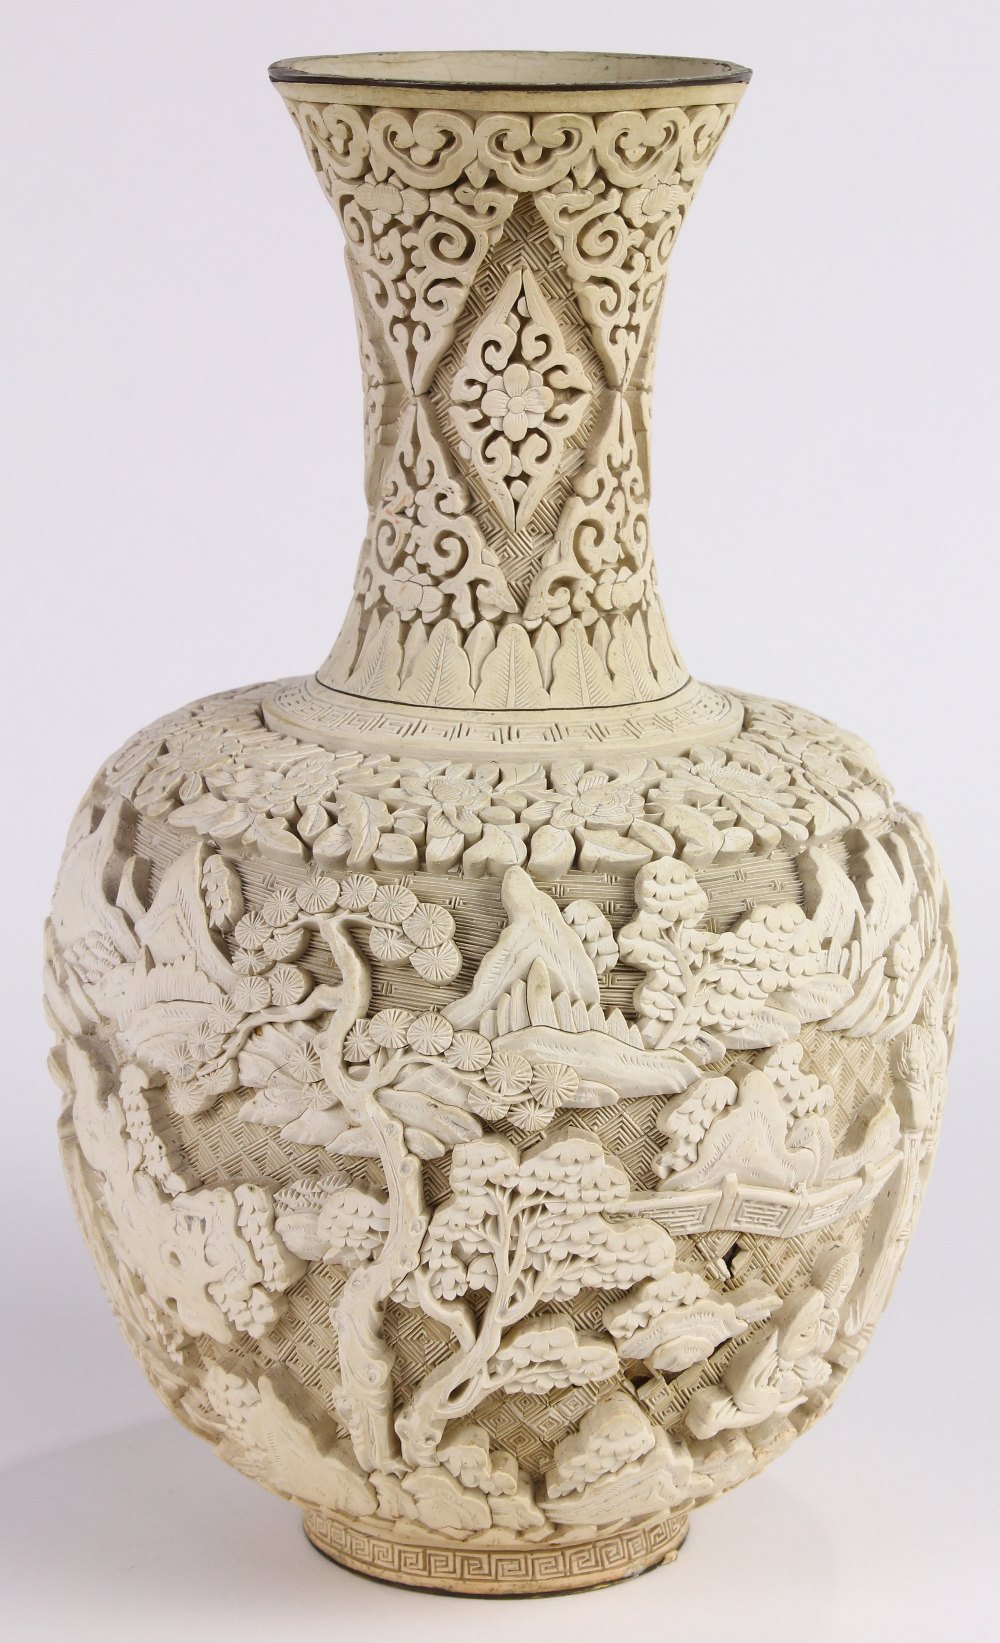 (lot of 3) Chinese decorative vases: consisting of one white lacquer vase carved with figures in - Image 9 of 10